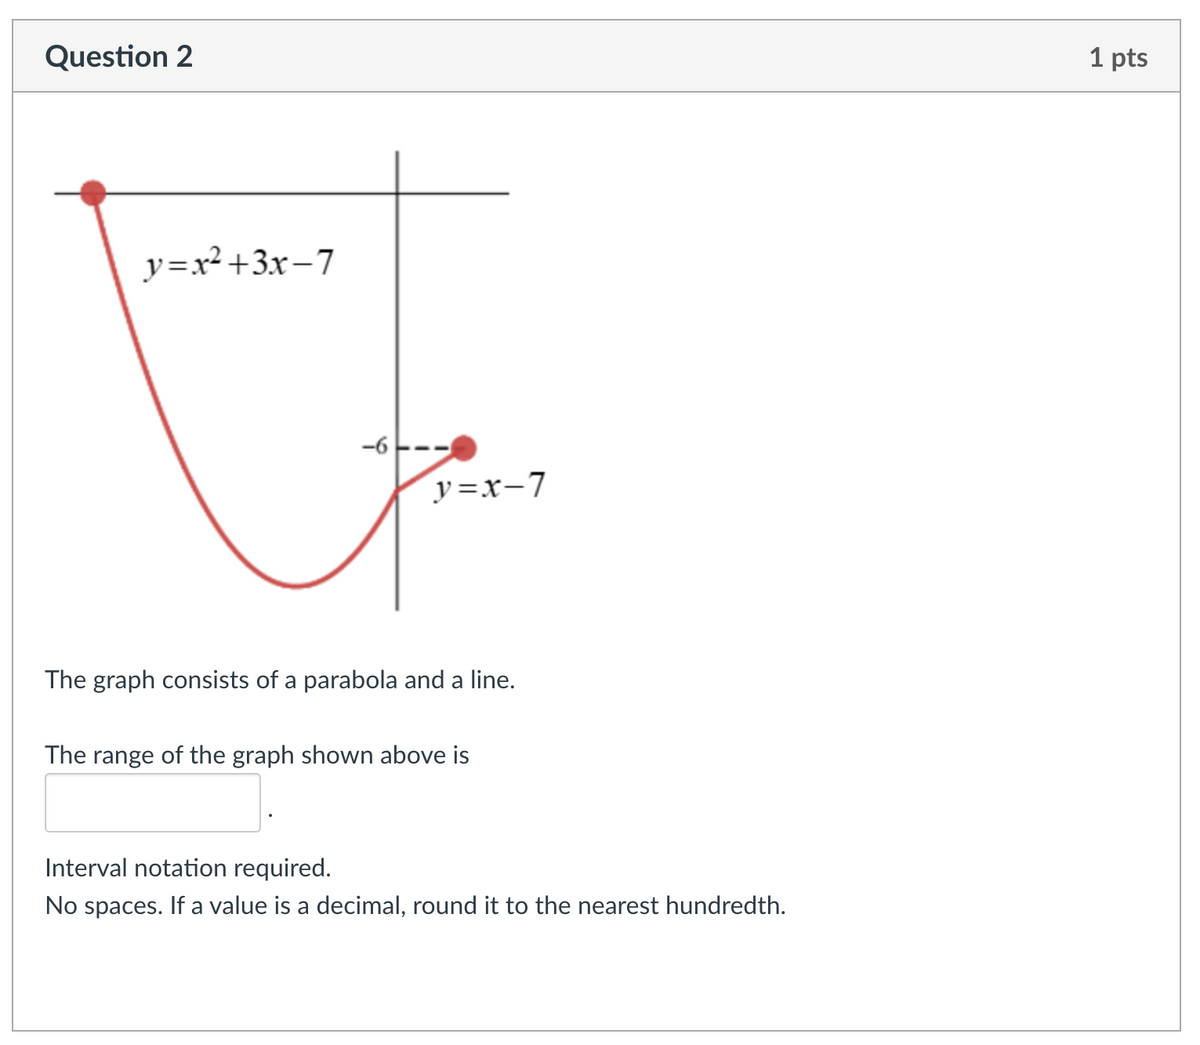 Question 2
y=x²+3x-7
-6
y=x-7
The graph consists of a parabola and a line.
The range of the graph shown above is
Interval notation required.
No spaces. If a value is a decimal, round it to the nearest hundredth.
1 pts